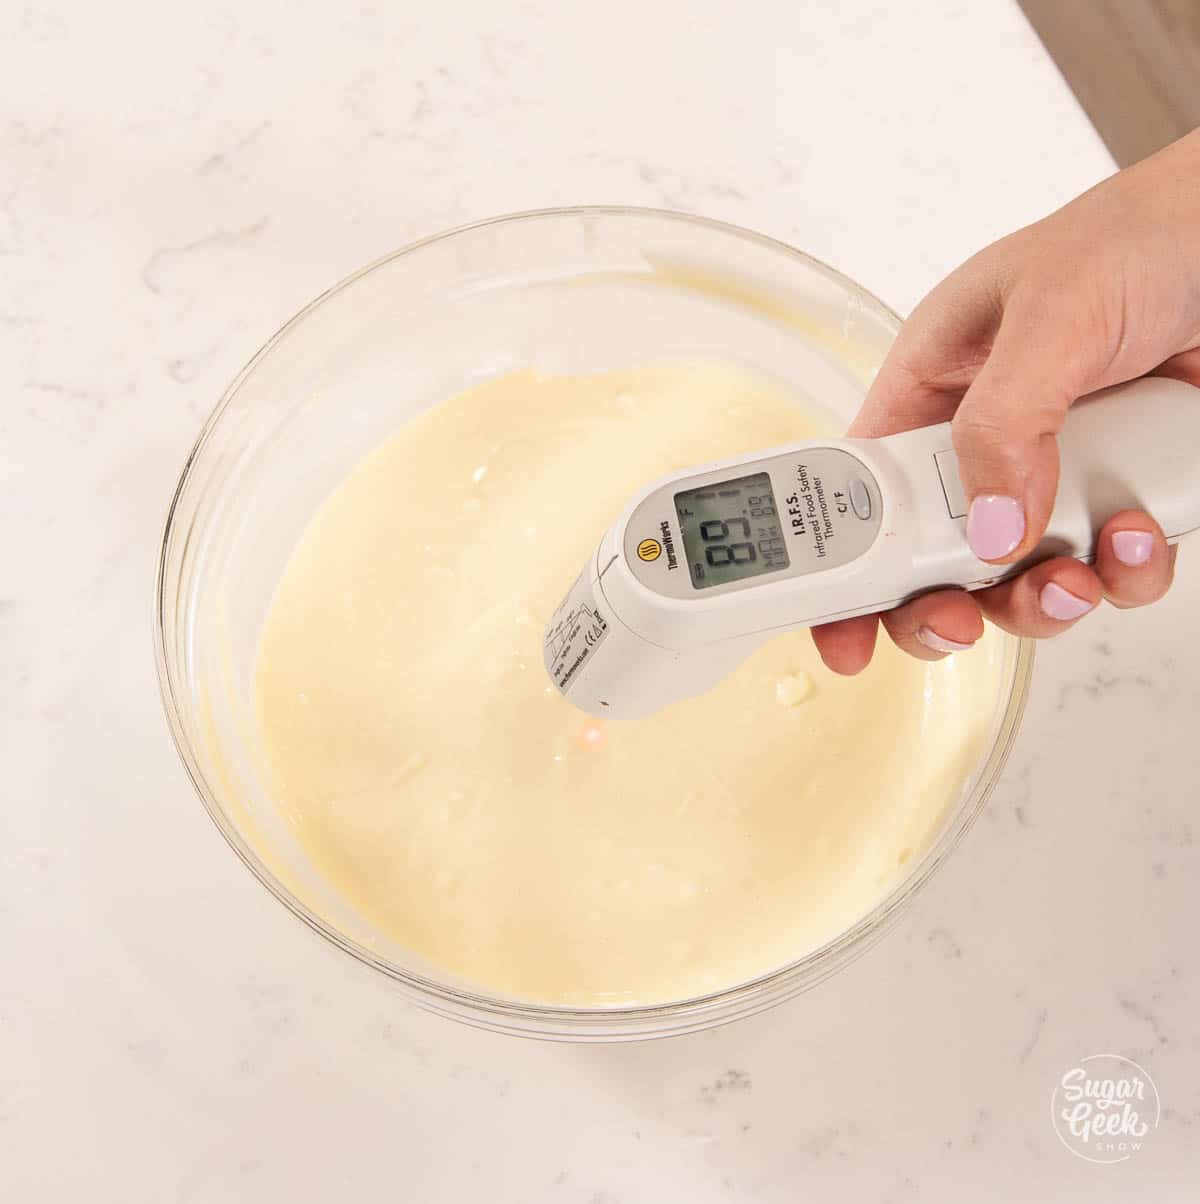 infrared thermometer above melted chocolate